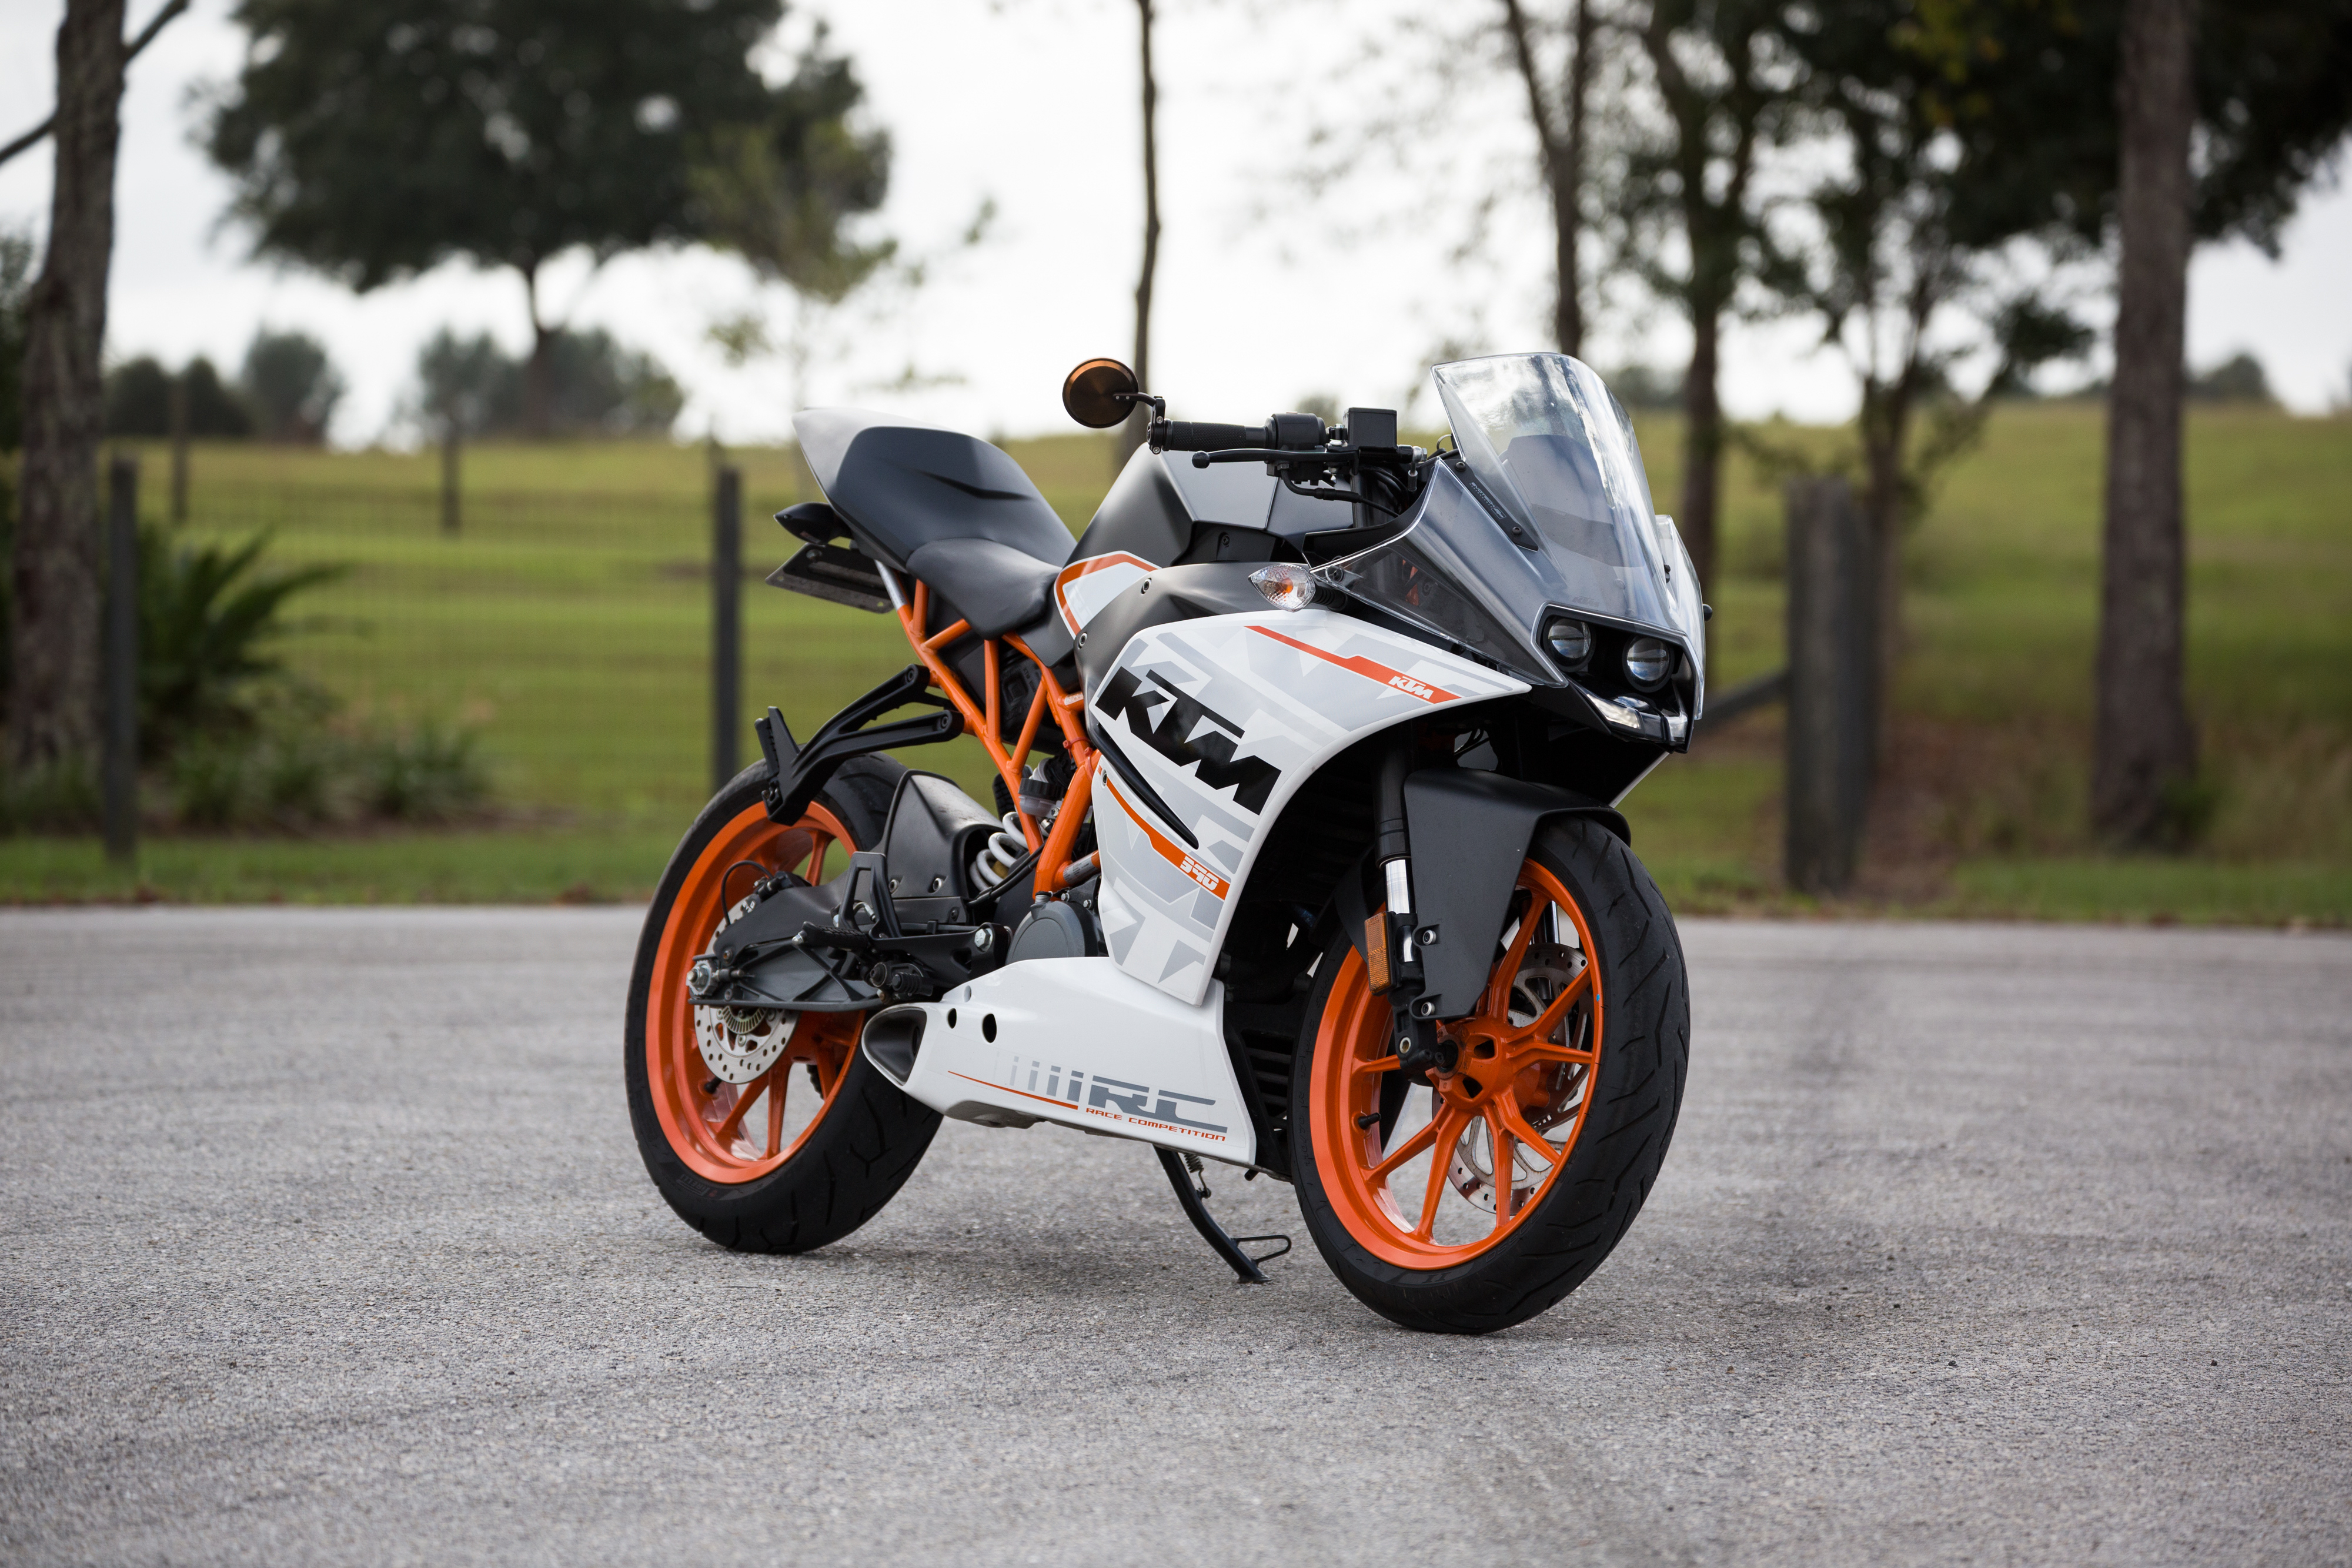 motorcycles, ktm, side view, motorcycle